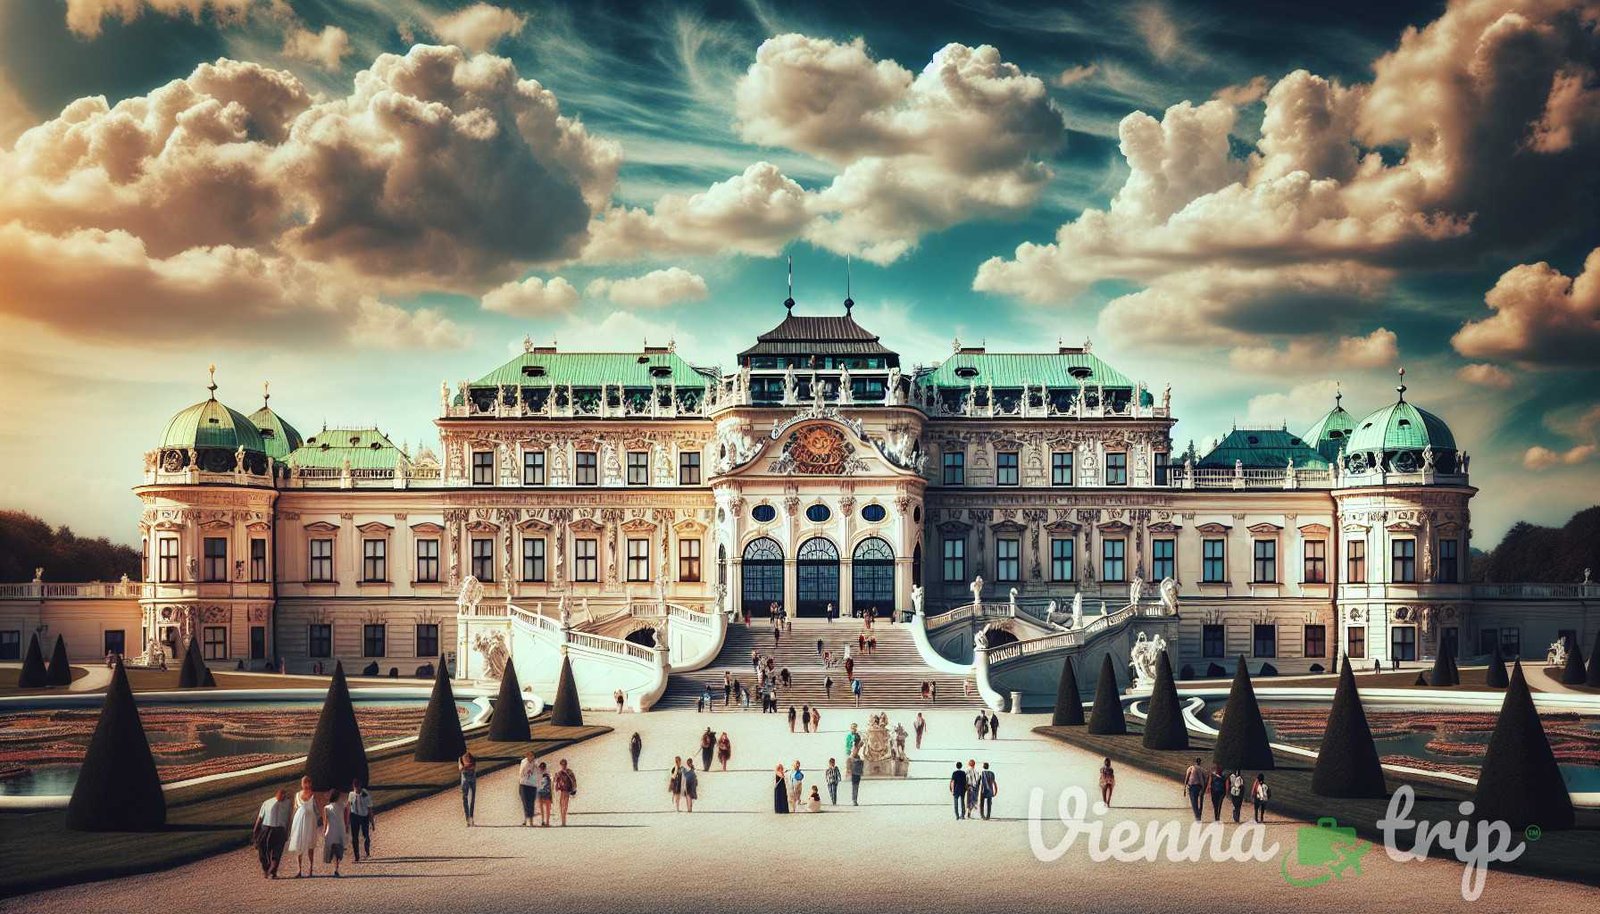 Illustration for section: Key highlights of the Belvedere Palace include: - vienna palaces